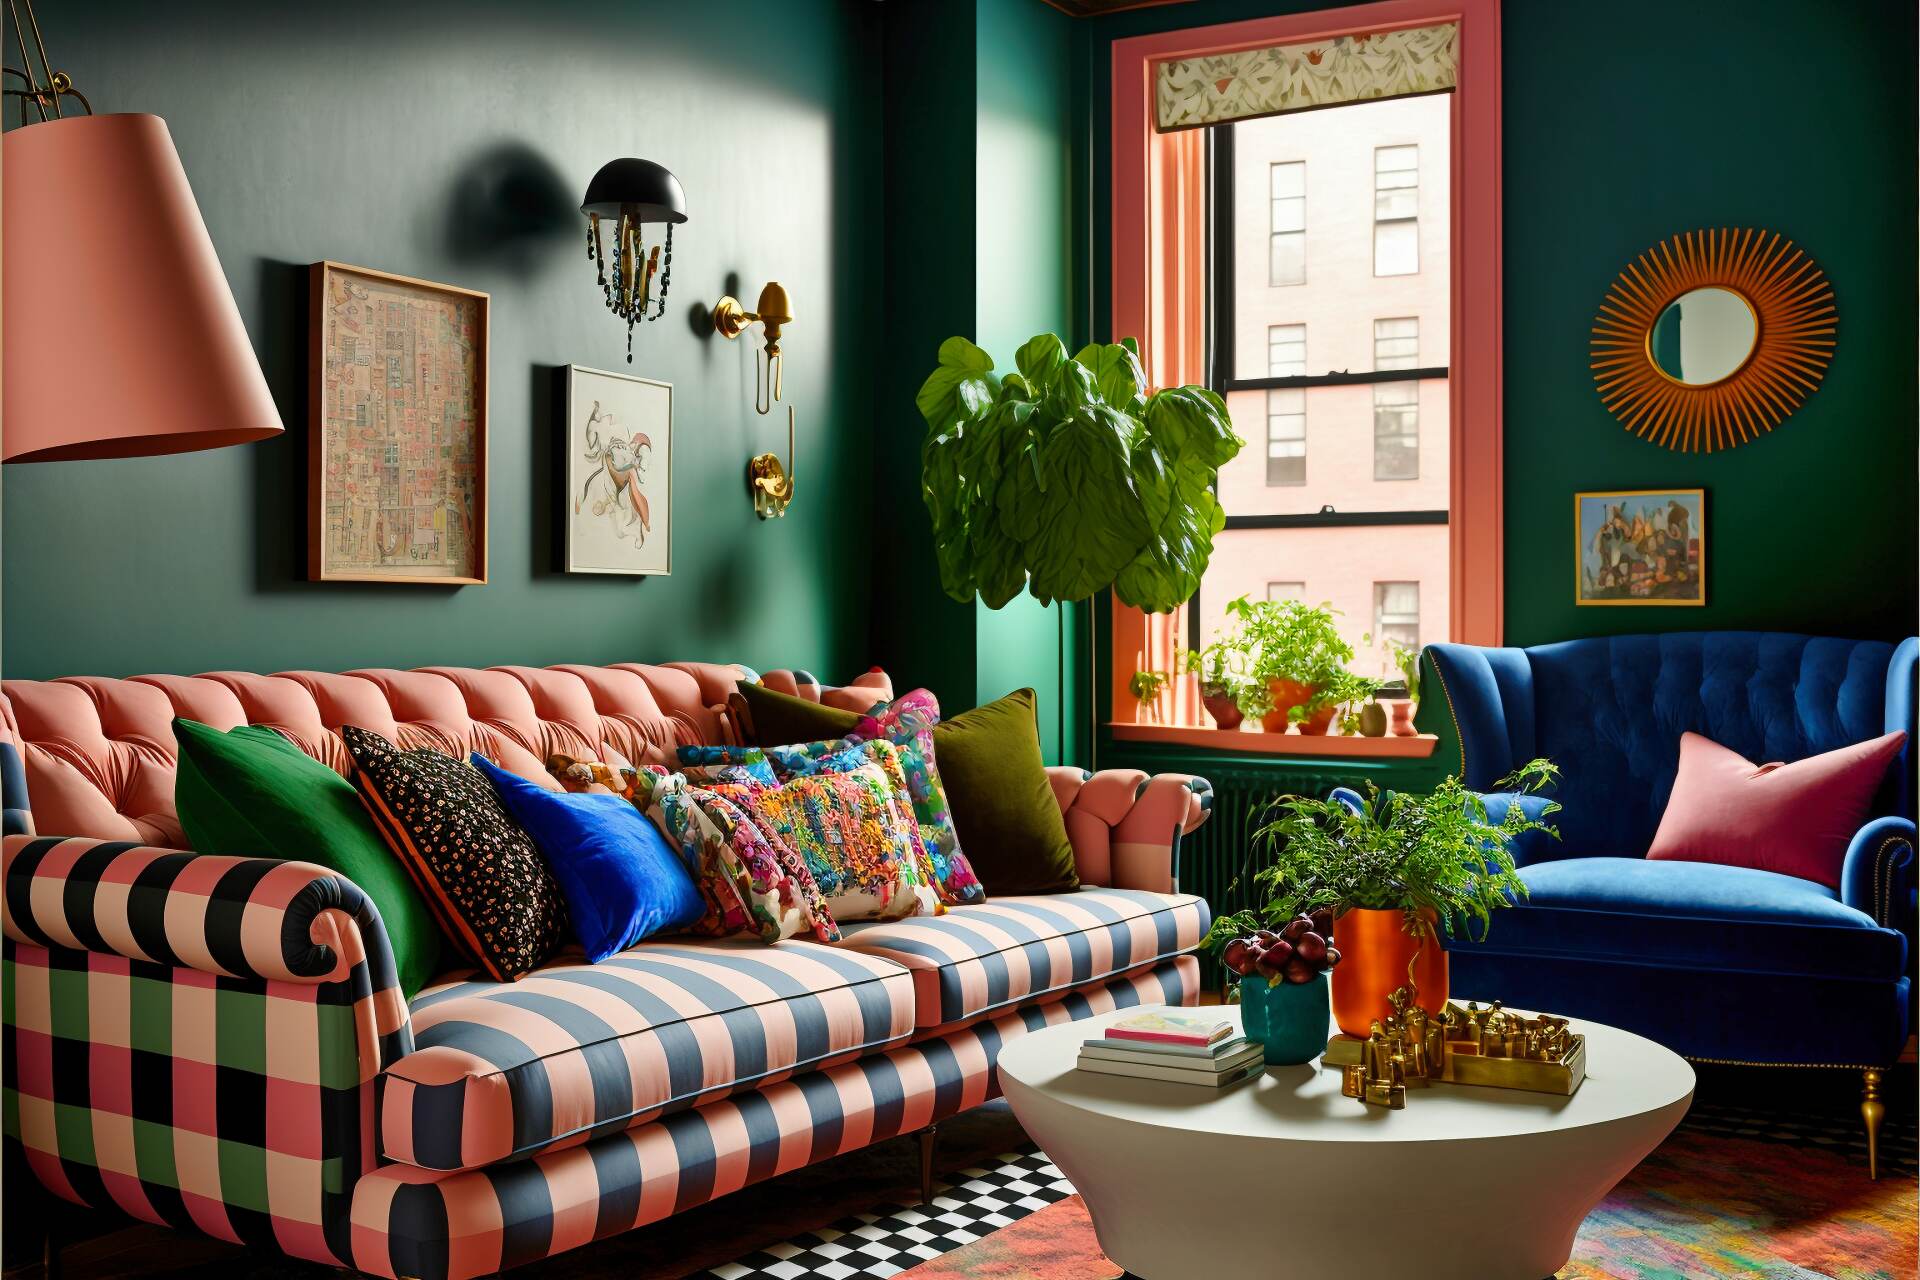 Colorful Eclectic Living Room - This Maximalist Living Room Provides A Whimsical Escape With Its Blend Of Eclectic Decor. A Terracotta-Toned Sofa Is Paired With A Bold Checkered Armchair While Patterned Pillows In Shades Of Blue, Pink, And Green Add Personality To The Room. A Hint Of Industrial Style Is Introduced By The Tv Mounted On The Wall And The Black Side Table Next To The Sofa. Colorful Artwork And Greenery Complete The Look For An Inviting Living Room Sure To Bring Joy To All.